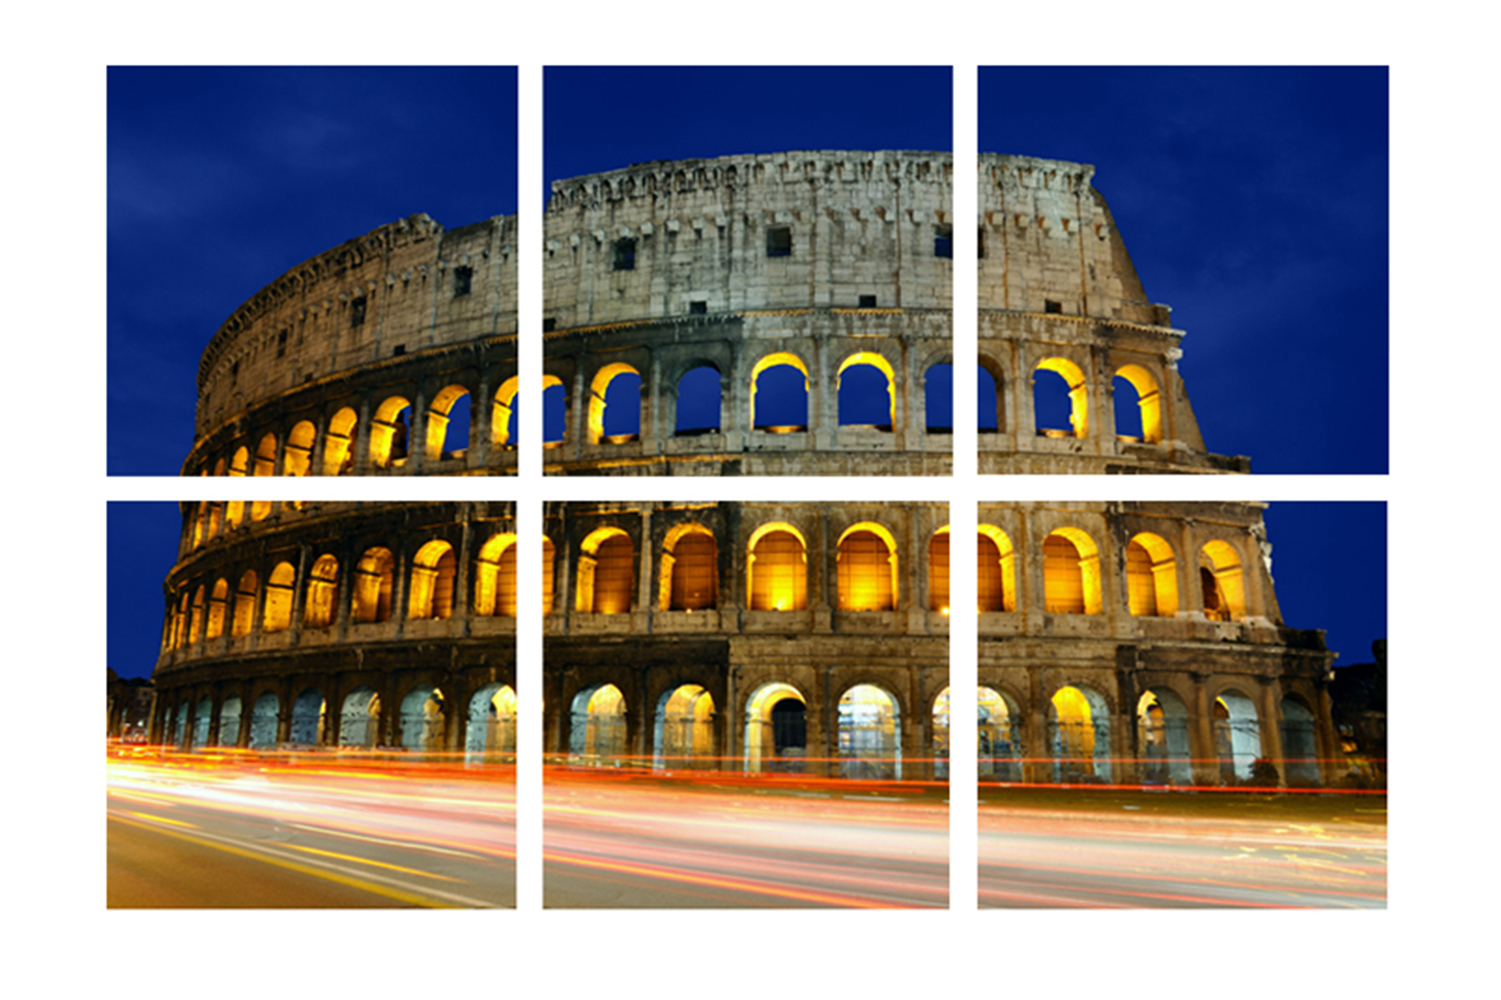 Willow &amp; Silk Canvas Landscape 40cm Set of 6 &#39;Colosseum at Night&#39; Wall Art